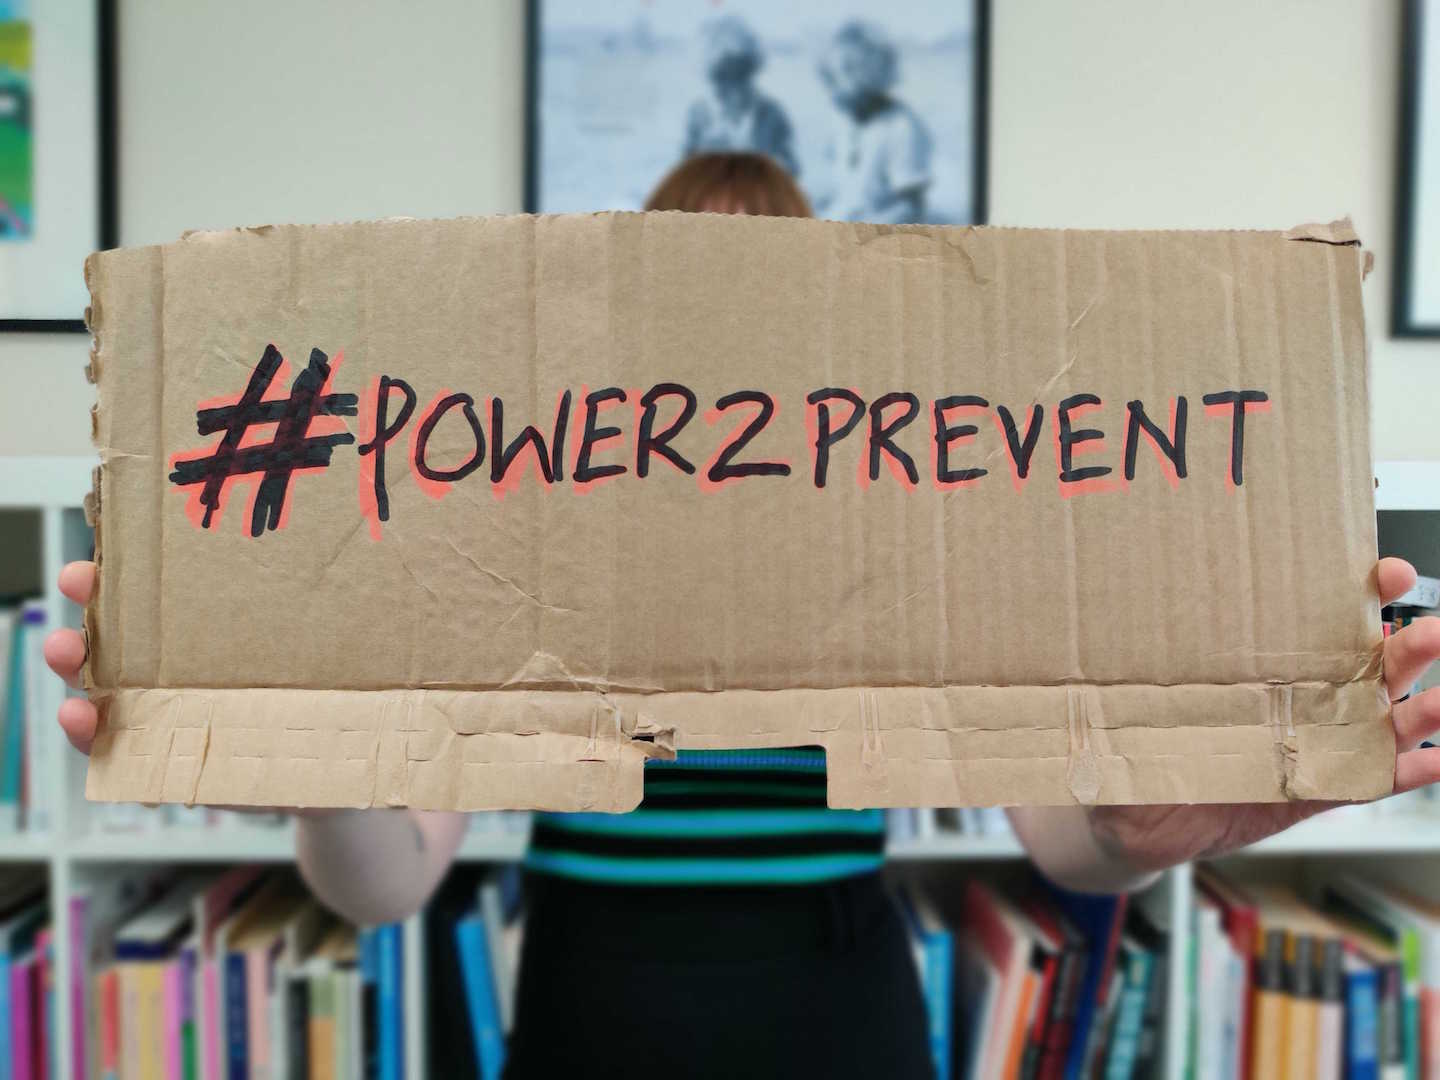 Image: woman holding up cardboard sign with hand written message: #Power2Prevent